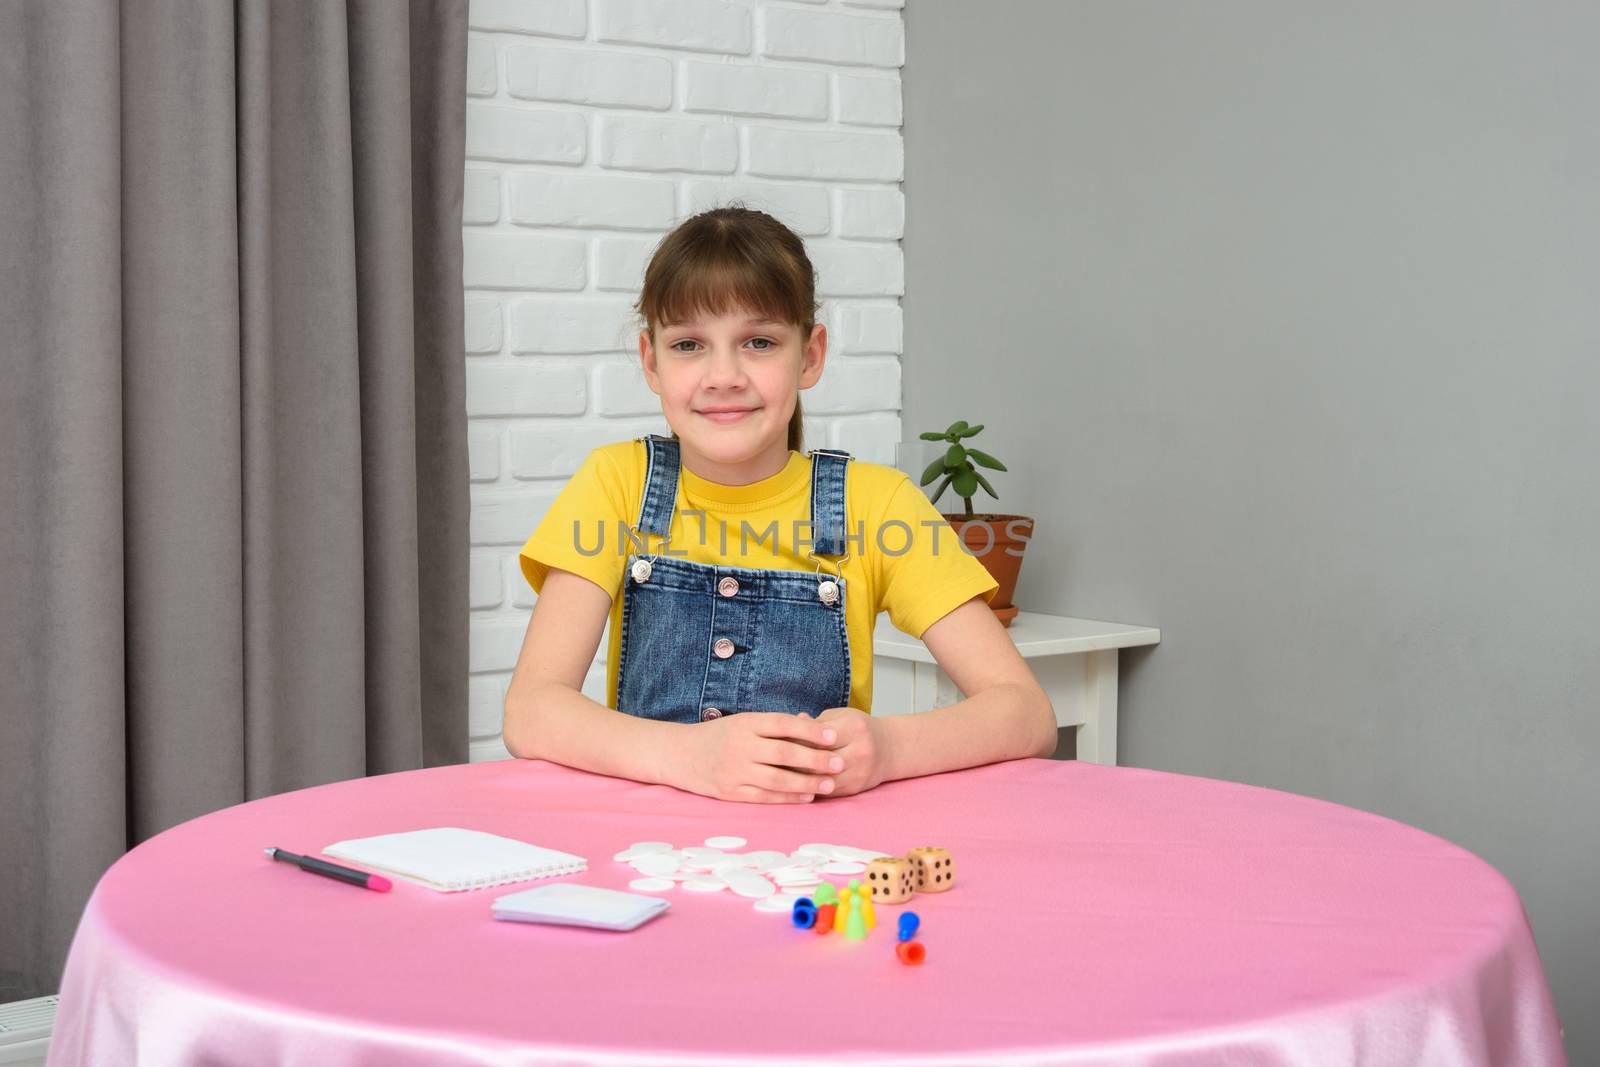 A girl sits at a table and prepares to play a board game